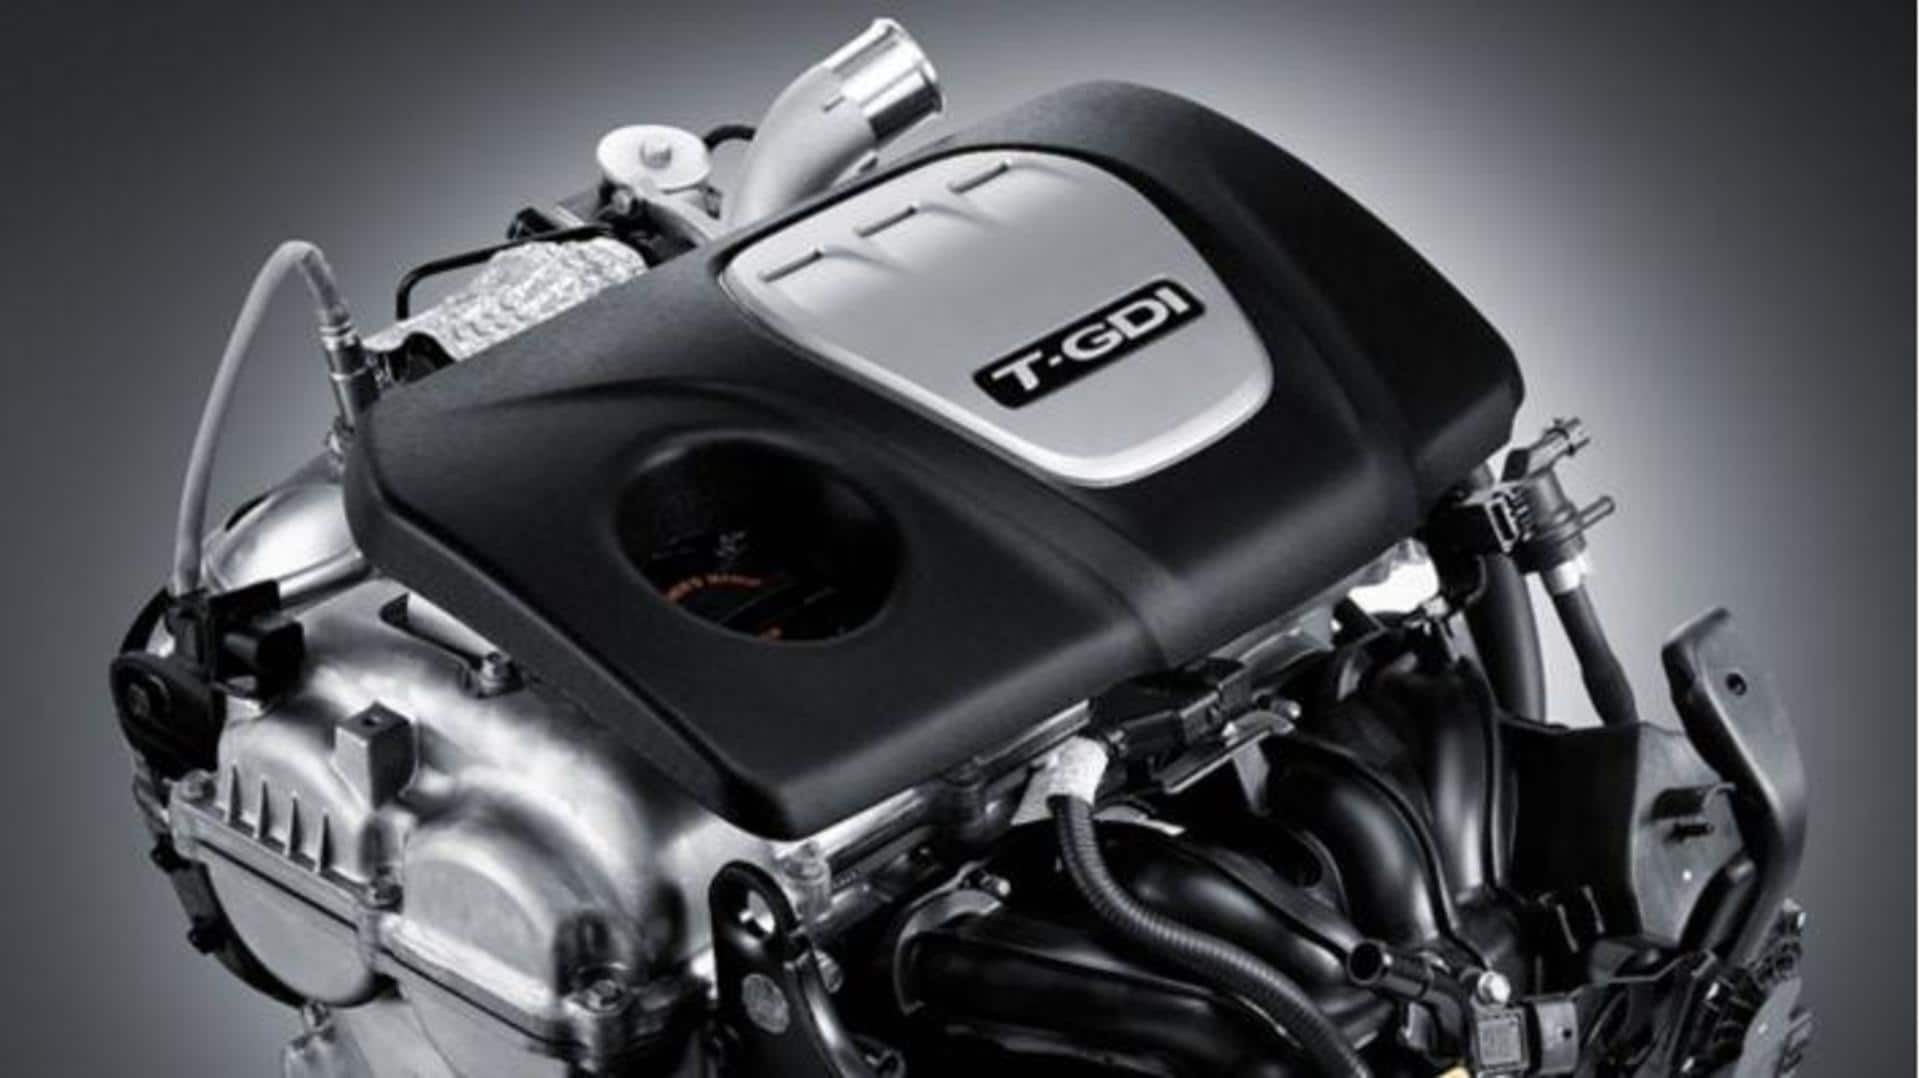 Buying a car with turbo engine? Know pros and cons